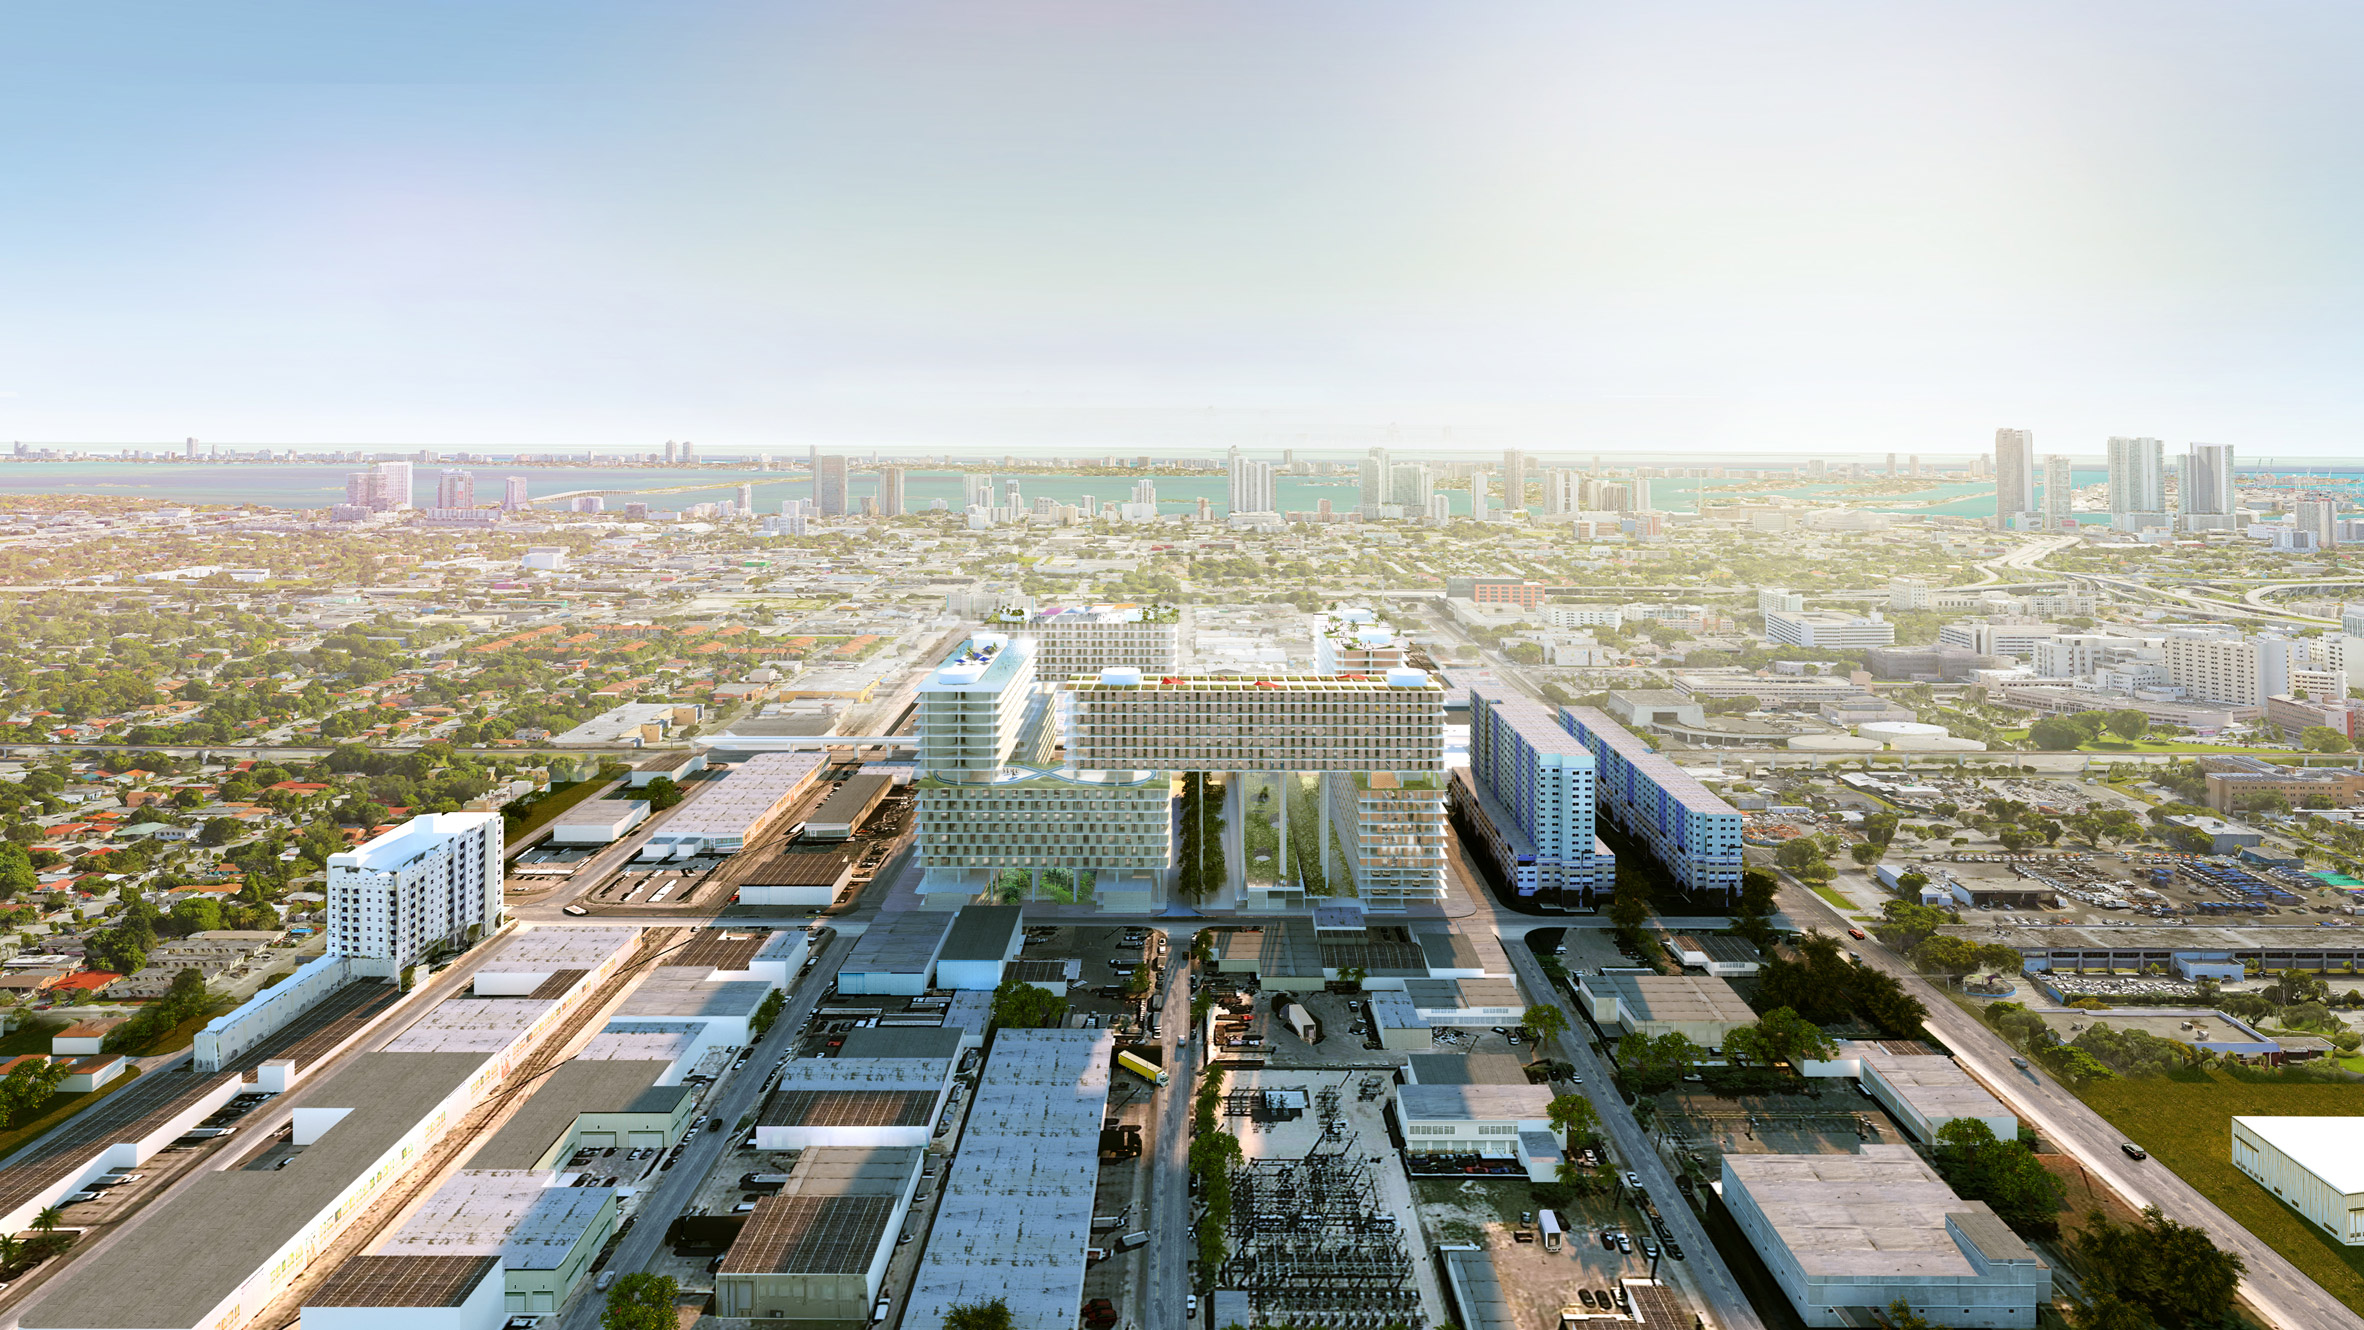 BIG reveals Miami Produce Center raised on stilts above former warehouses